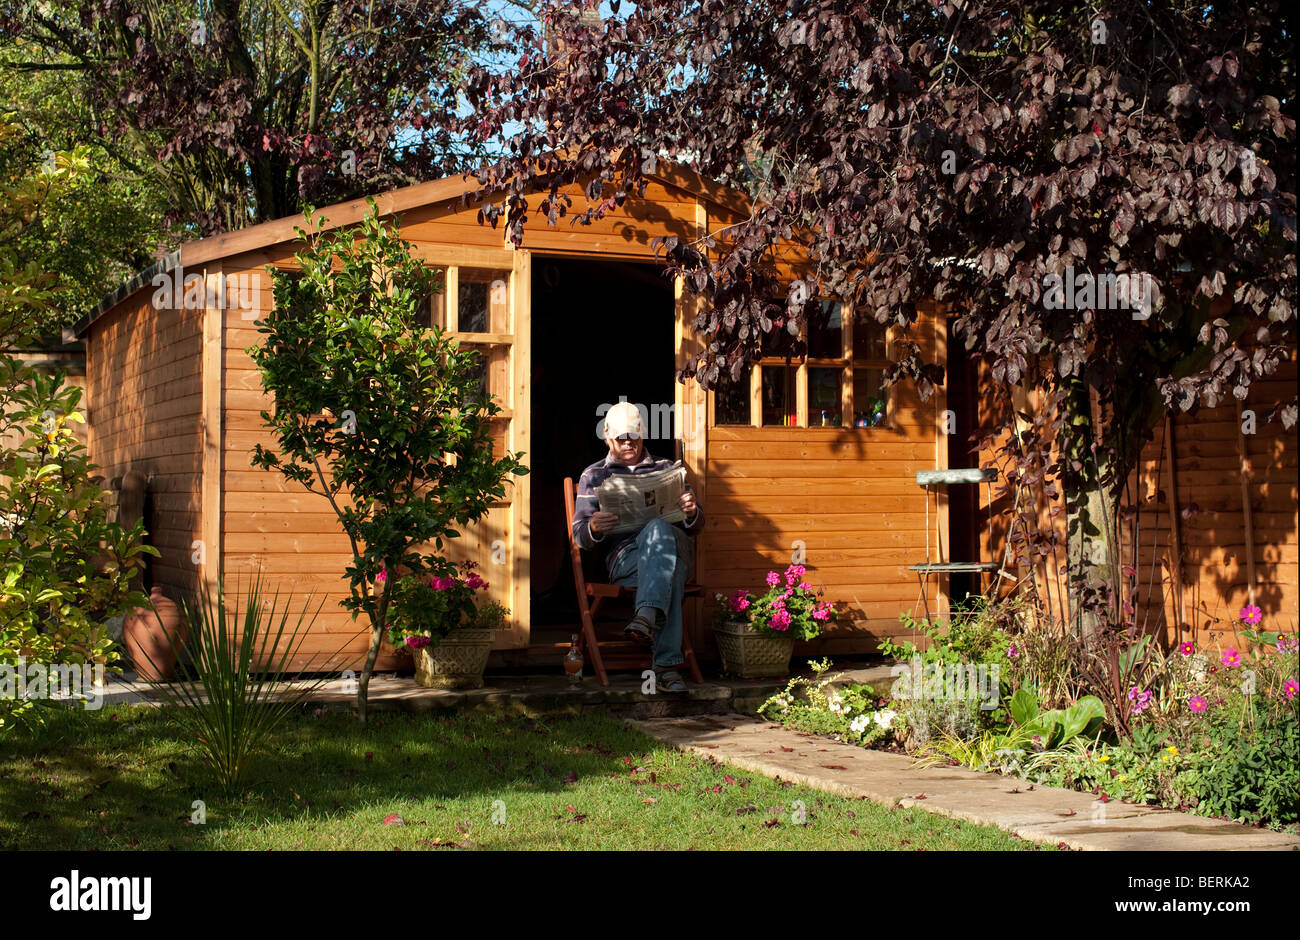 Man relaxes and reads newspaper in garden shed Stock Photo